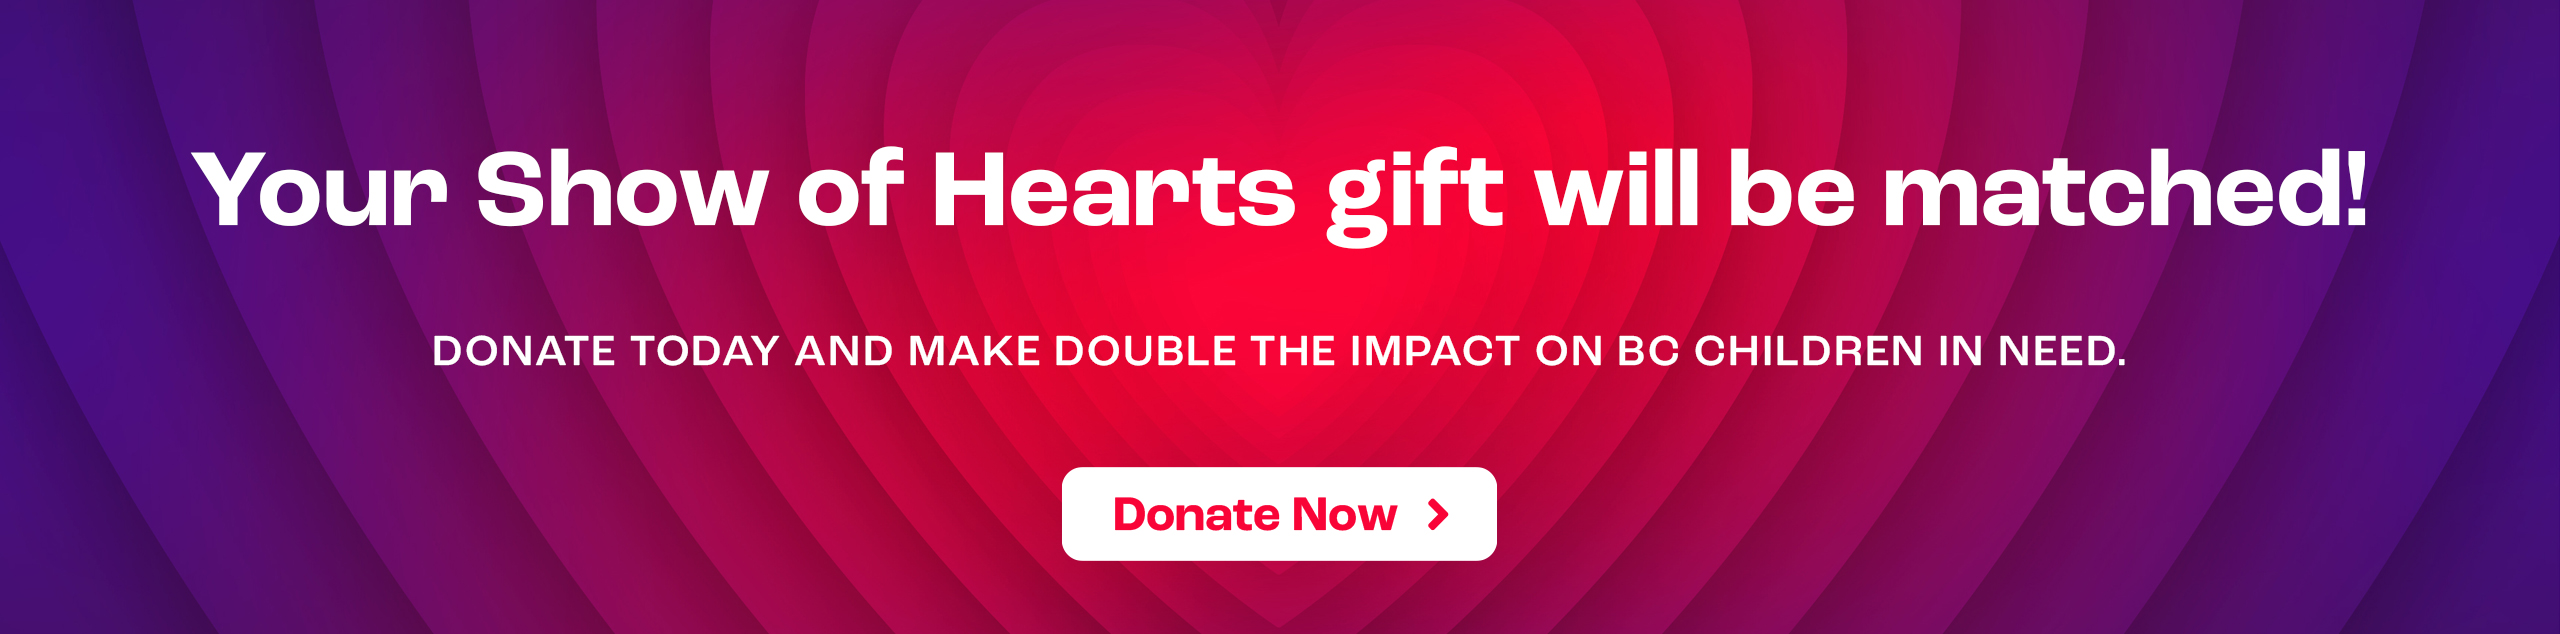 Show of Hearts - donate now.